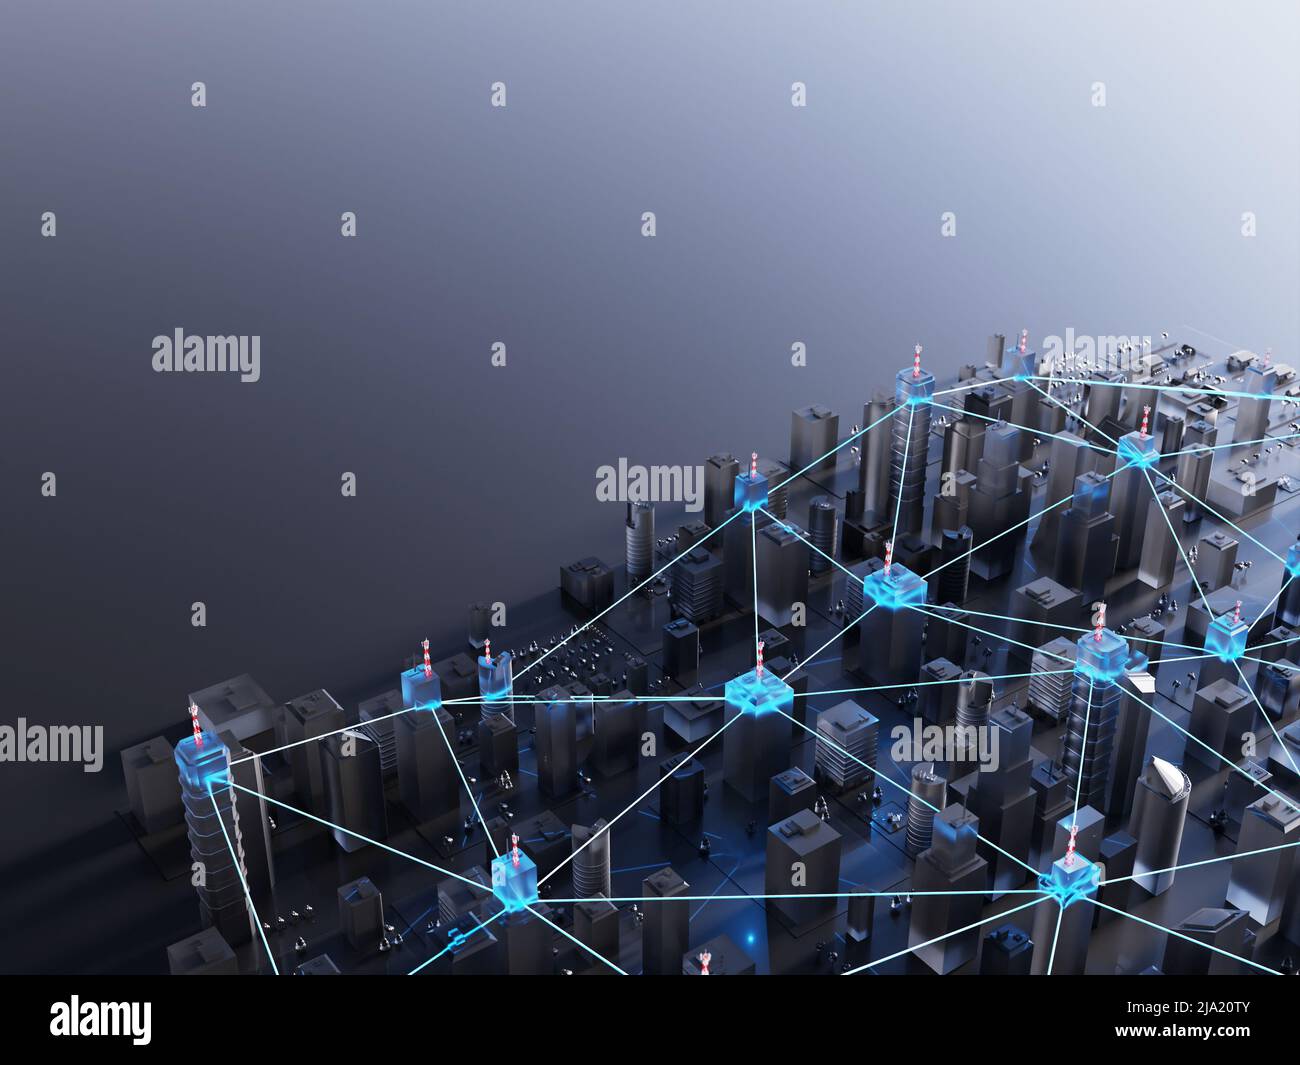 Modern, futuristic smart city. Internet, decentralized networks concept. Abstract background. Digital 3D rendering. Stock Photo